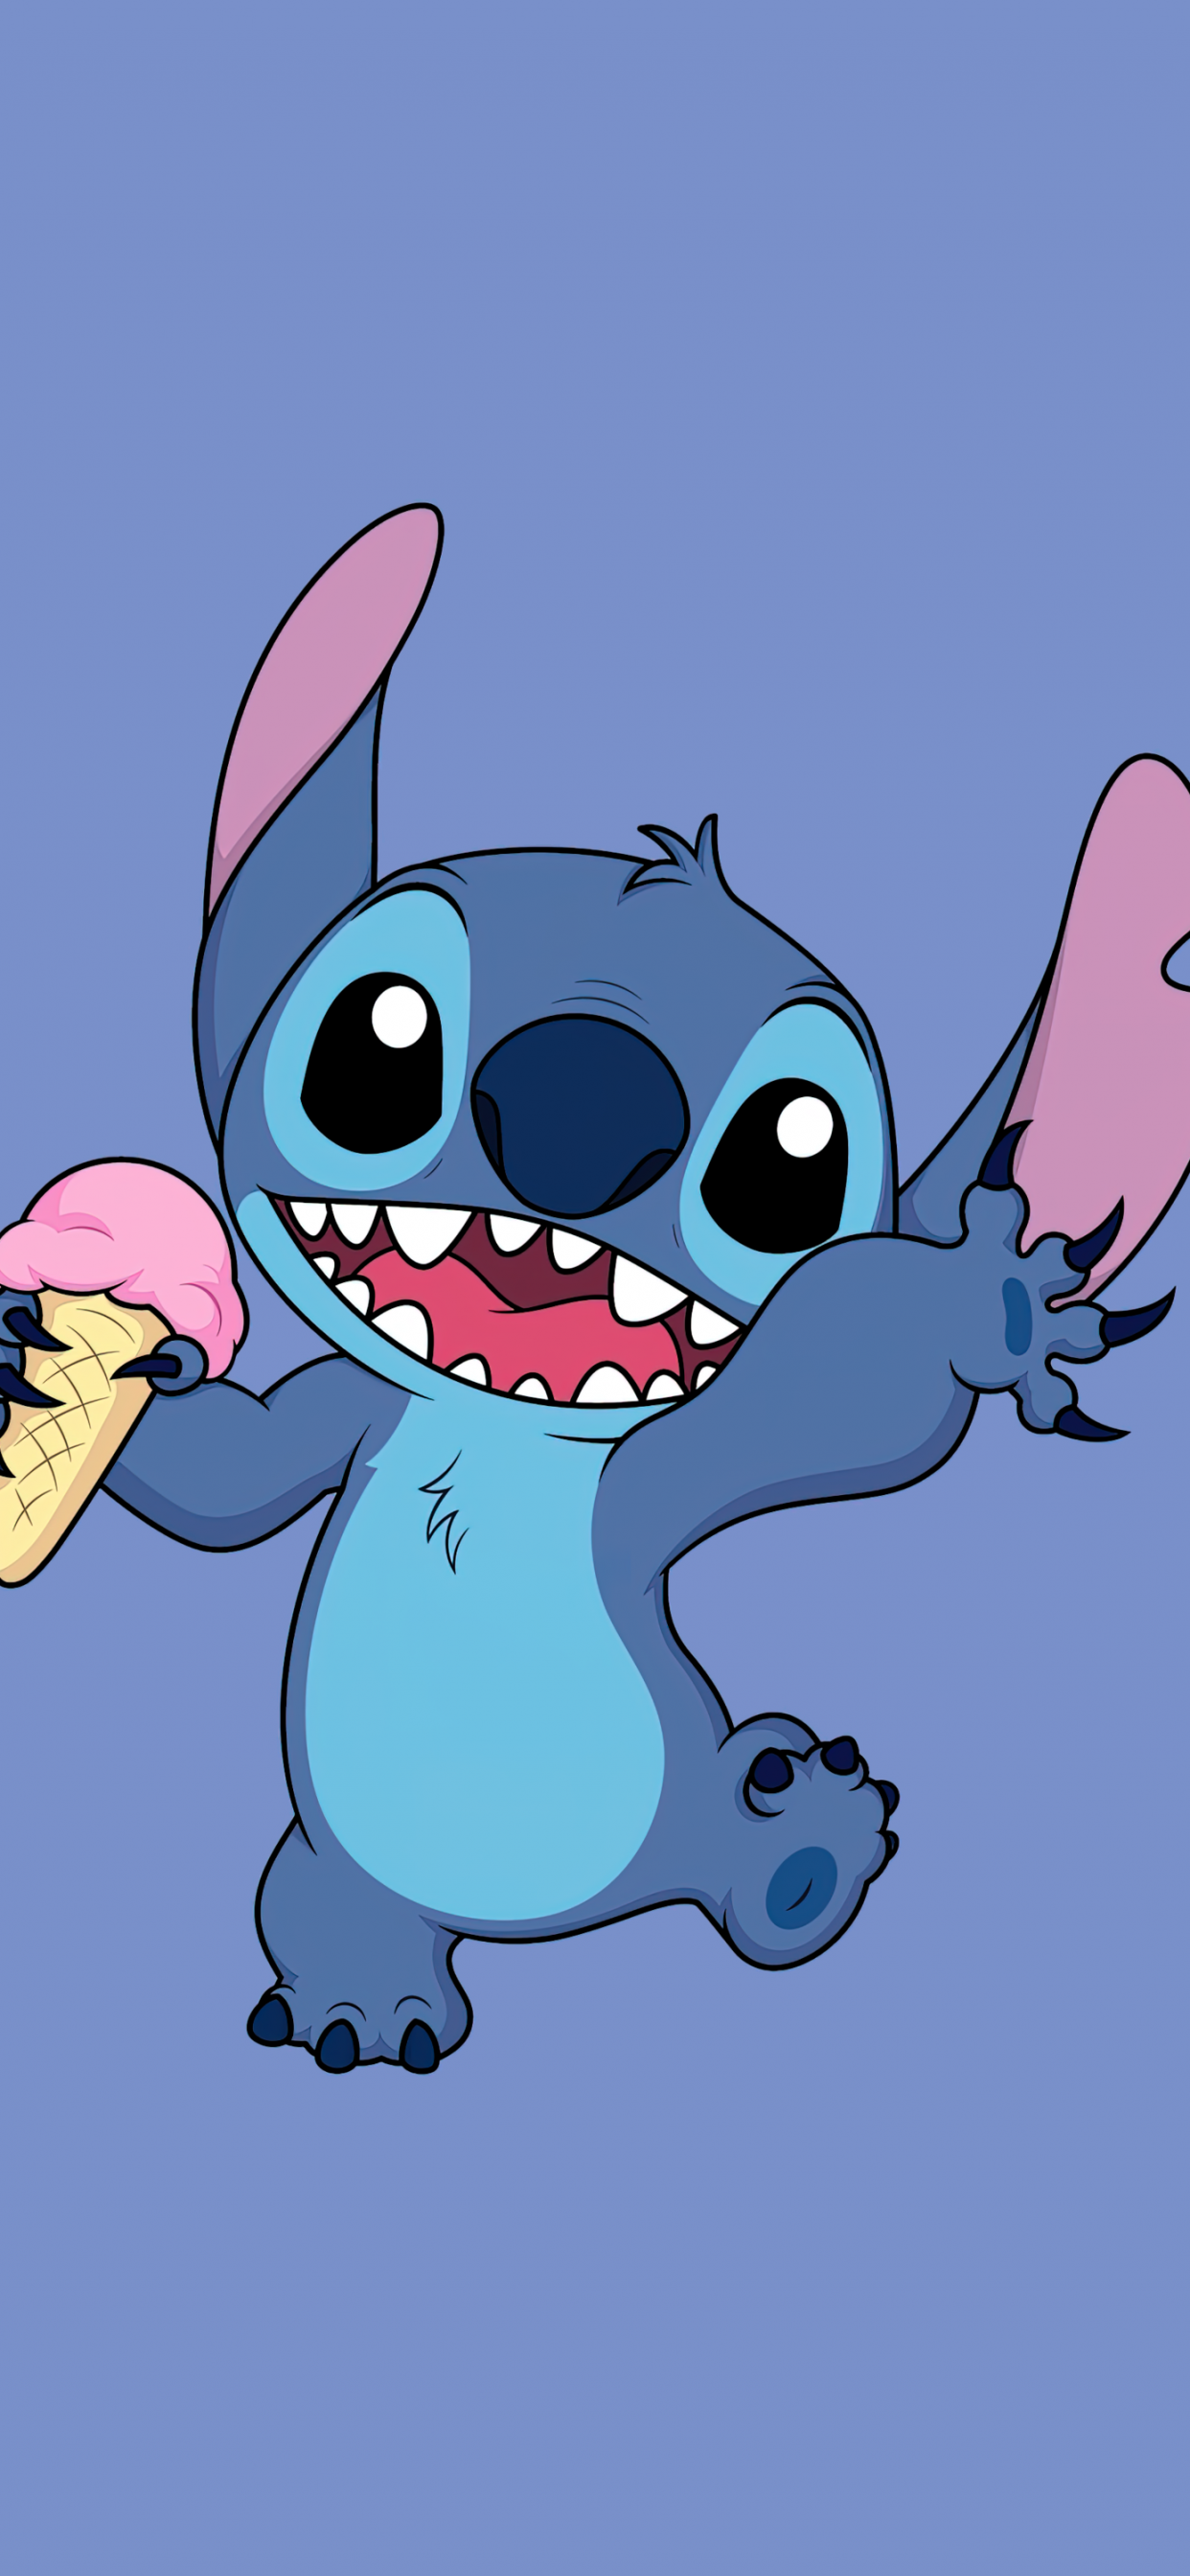 Aesthetic stitch wallpaper by Kakarfah  Download on ZEDGE  52a6